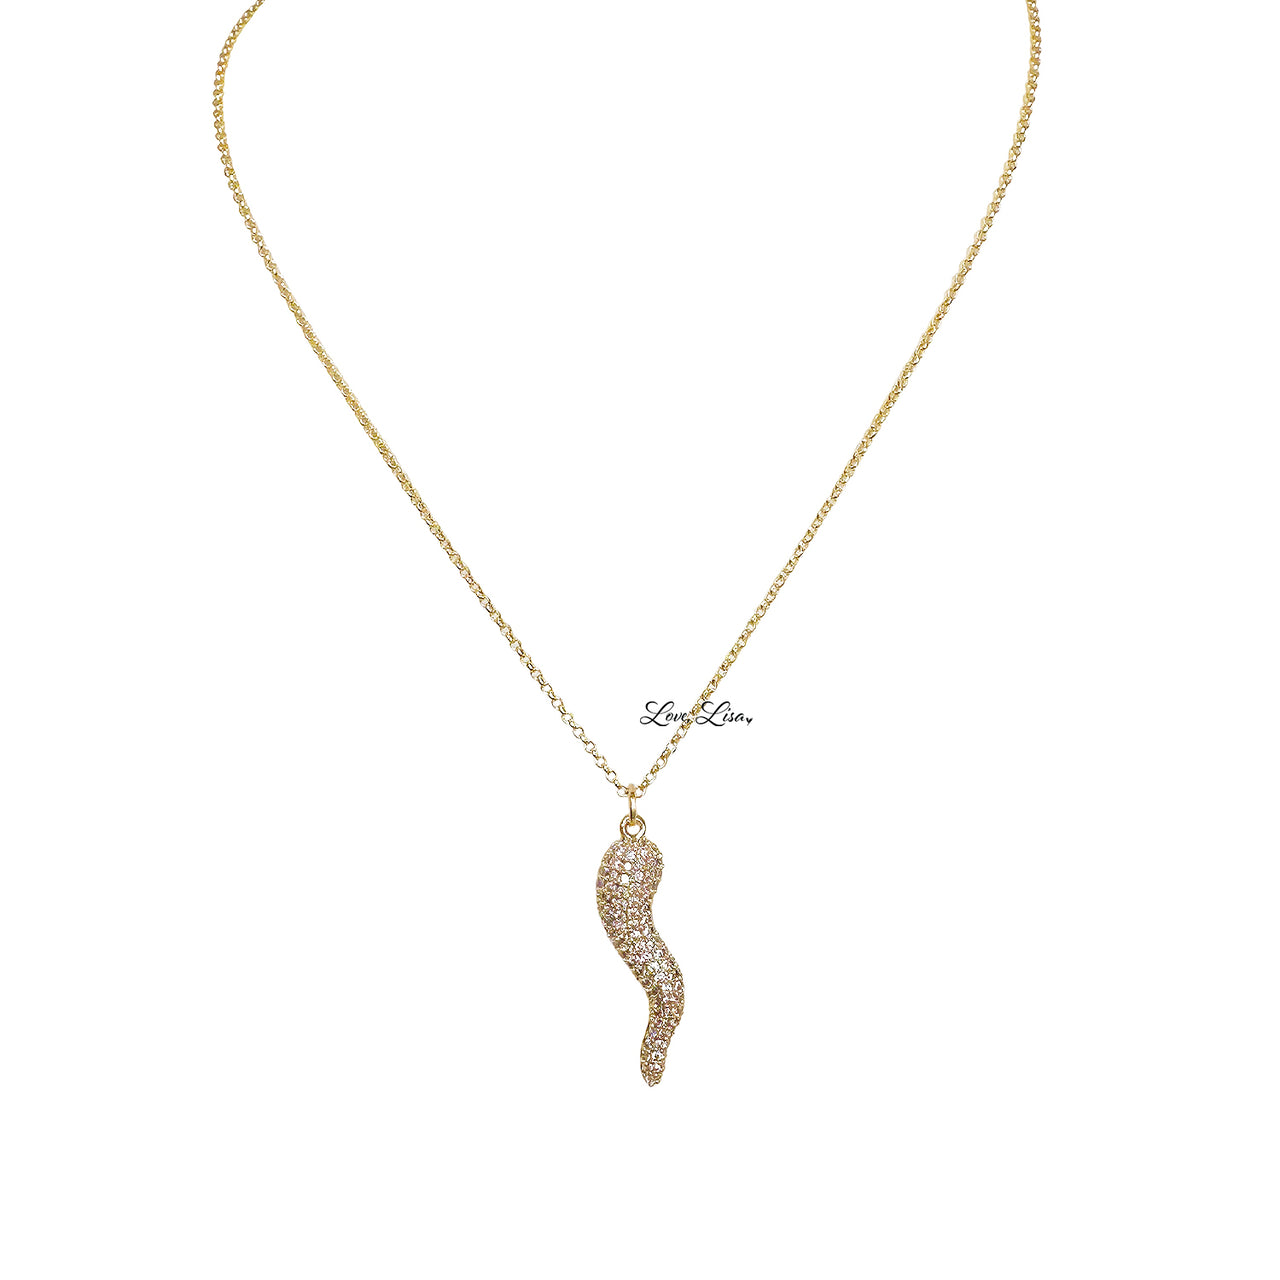 Gia's Large Glam Pave Horn (Cornicello) Necklace